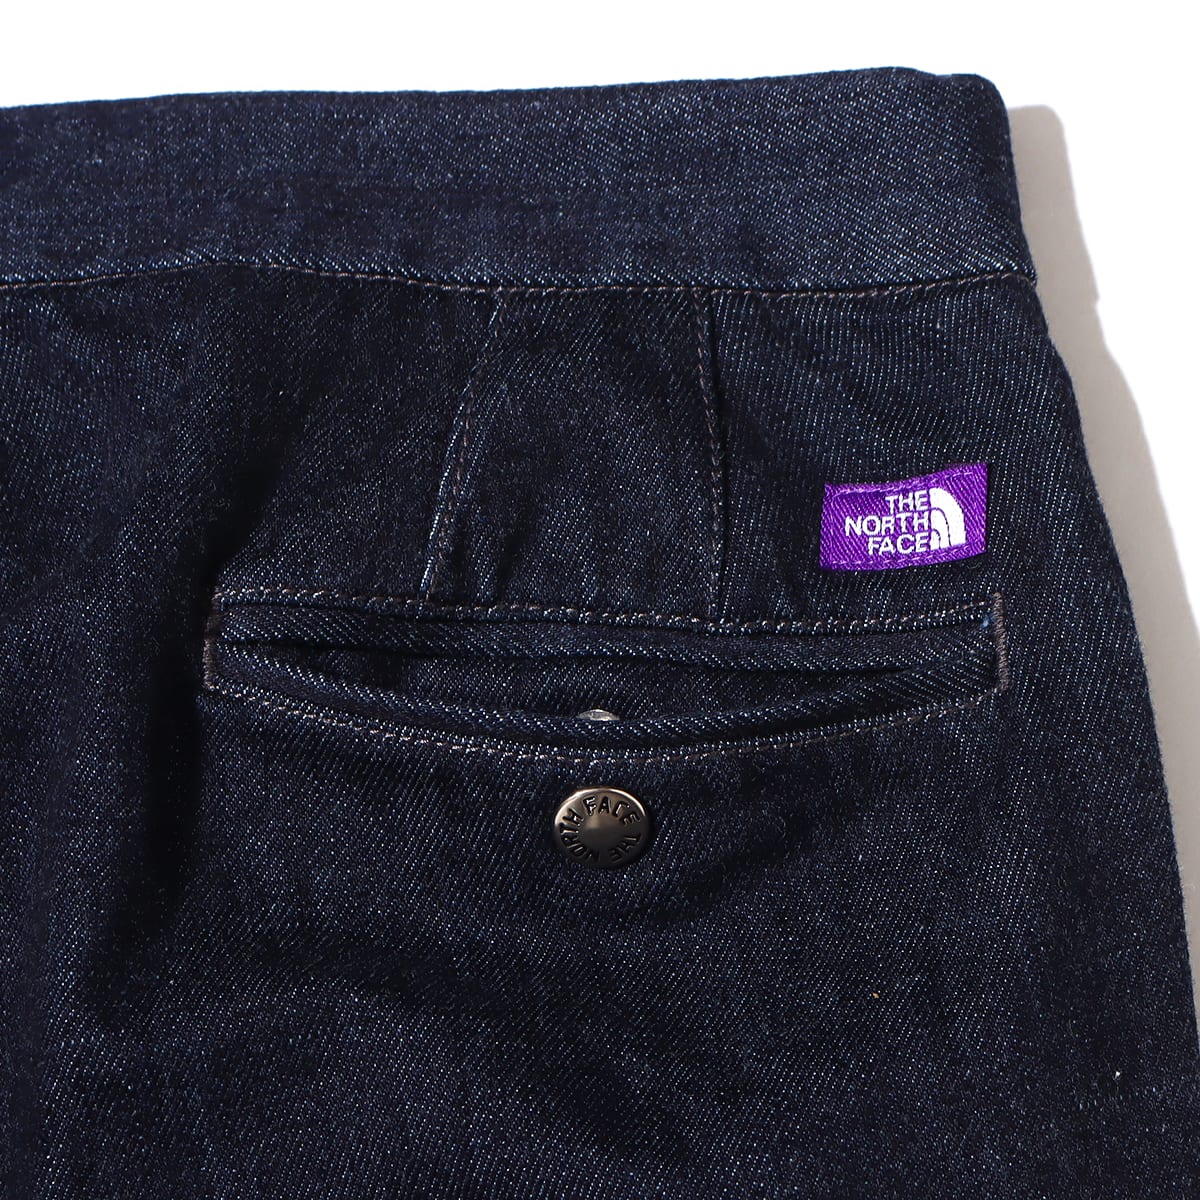 THE NORTH FACE PURPLE LABEL Denim Wide Tapered Pants Indigo